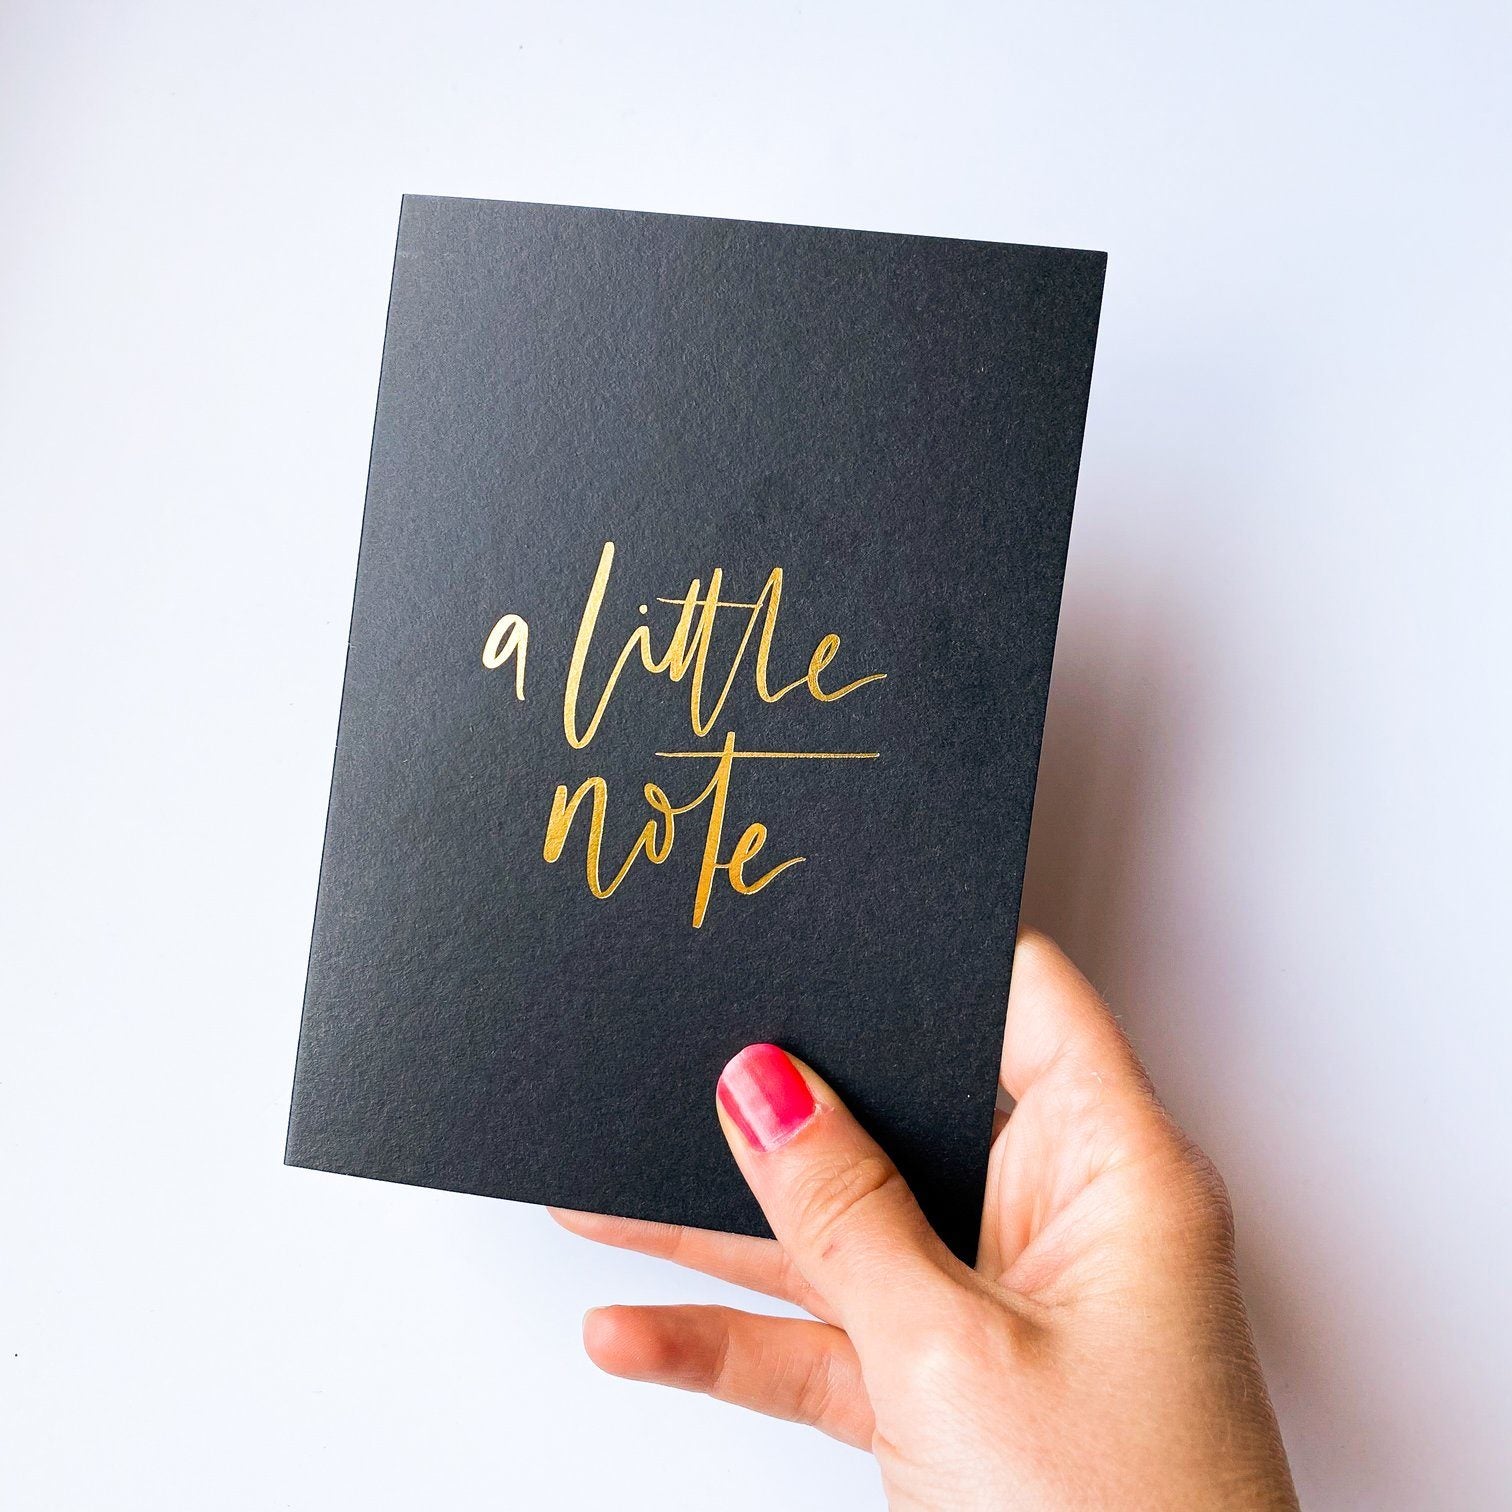 Gift Card - Photo of a hand holding a black occasion card that states "A little Note!" in gold foil